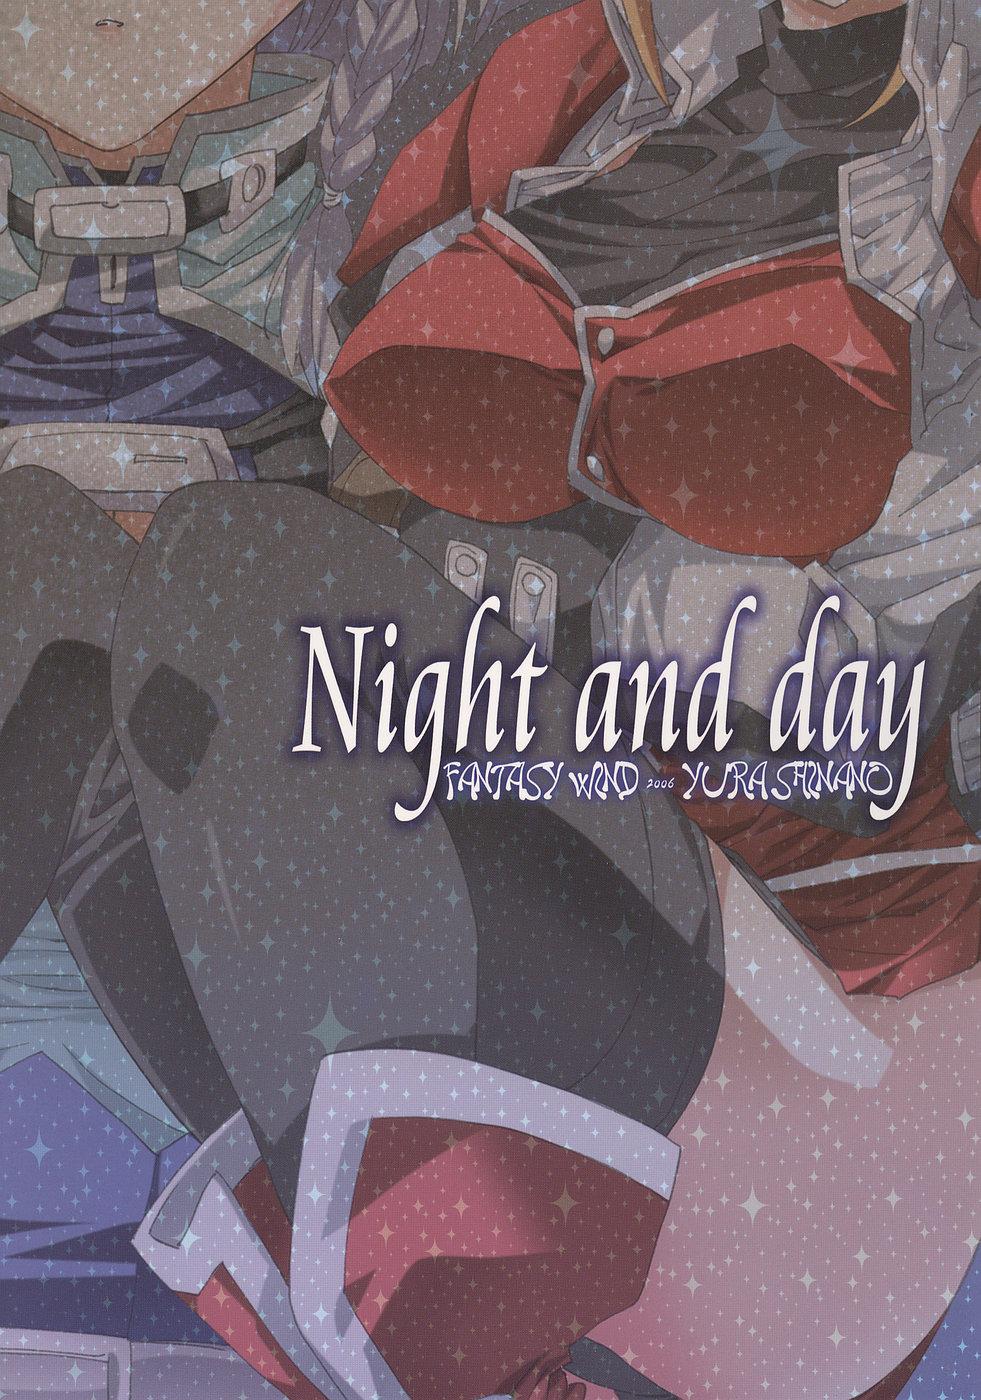 Young Night and day - Super robot wars Seduction Porn - Page 34